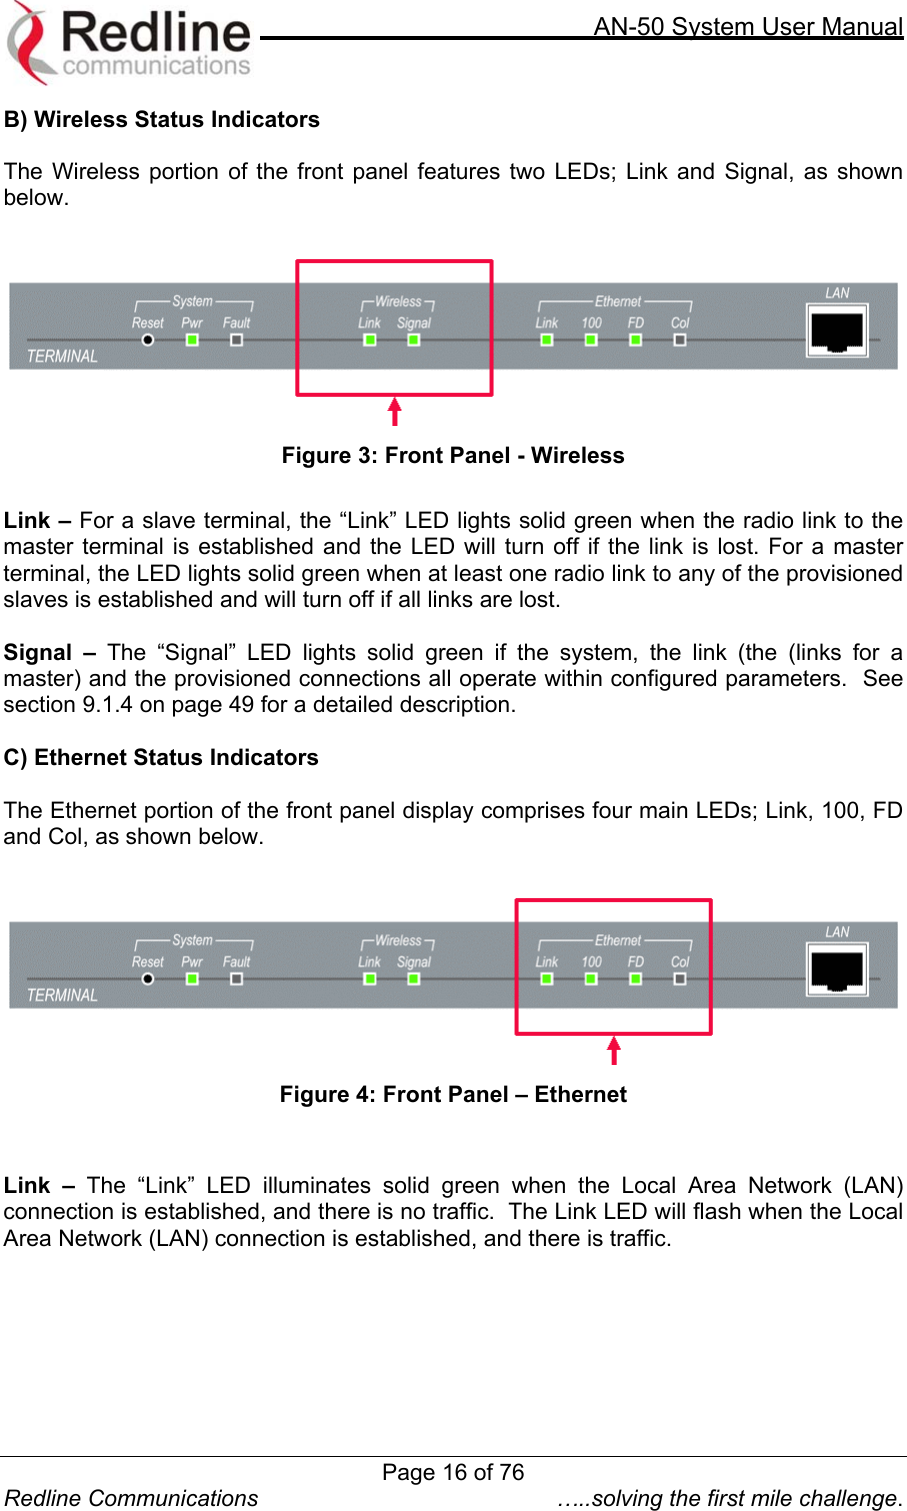     AN-50 System User Manual  Redline Communications  …..solving the first mile challenge. B) Wireless Status Indicators  The Wireless portion of the front panel features two LEDs; Link and Signal, as shown below.   Figure 3: Front Panel - Wireless  Link – For a slave terminal, the “Link” LED lights solid green when the radio link to the master terminal is established and the LED will turn off if the link is lost. For a master terminal, the LED lights solid green when at least one radio link to any of the provisioned slaves is established and will turn off if all links are lost.  Signal – The “Signal” LED lights solid green if the system, the link (the (links for a master) and the provisioned connections all operate within configured parameters.  See section 9.1.4 on page 49 for a detailed description.  C) Ethernet Status Indicators  The Ethernet portion of the front panel display comprises four main LEDs; Link, 100, FD and Col, as shown below.   Figure 4: Front Panel – Ethernet   Link – The “Link” LED illuminates solid green when the Local Area Network (LAN) connection is established, and there is no traffic.  The Link LED will flash when the Local Area Network (LAN) connection is established, and there is traffic.  Page 16 of 76